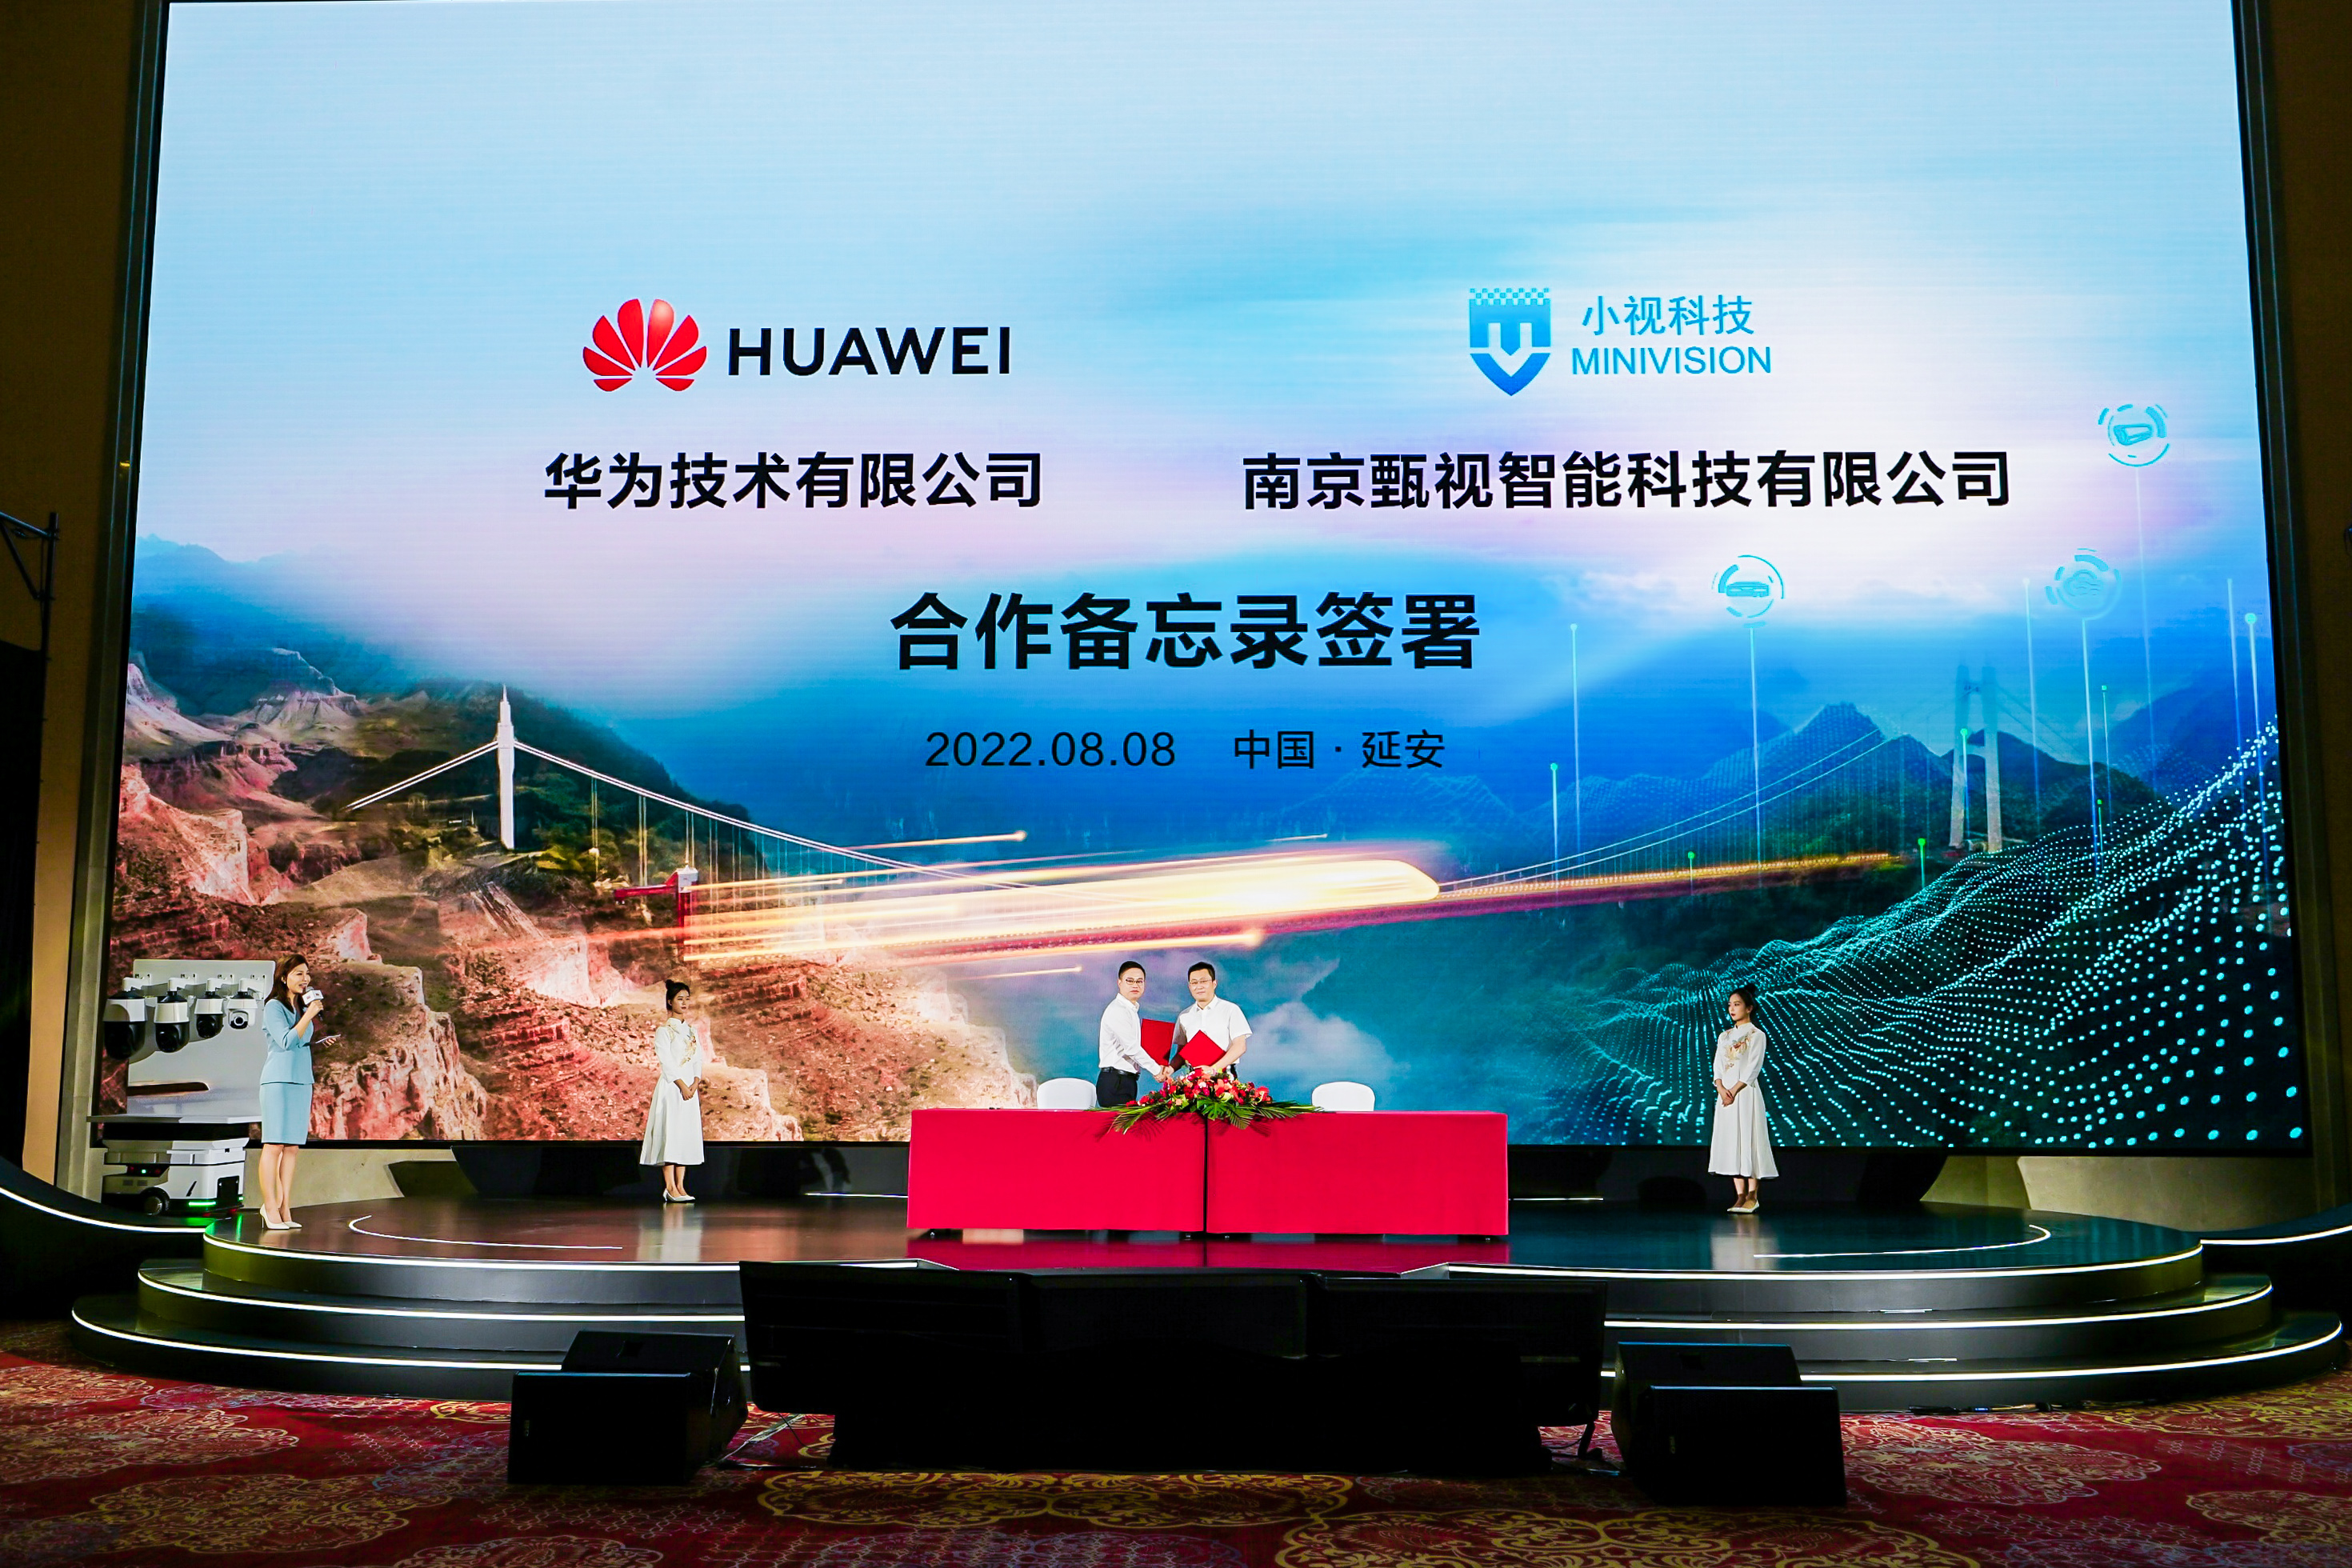 Minivision signs a memorandum of cooperation with Huawei to jointly build a machine vision industry ecosystem